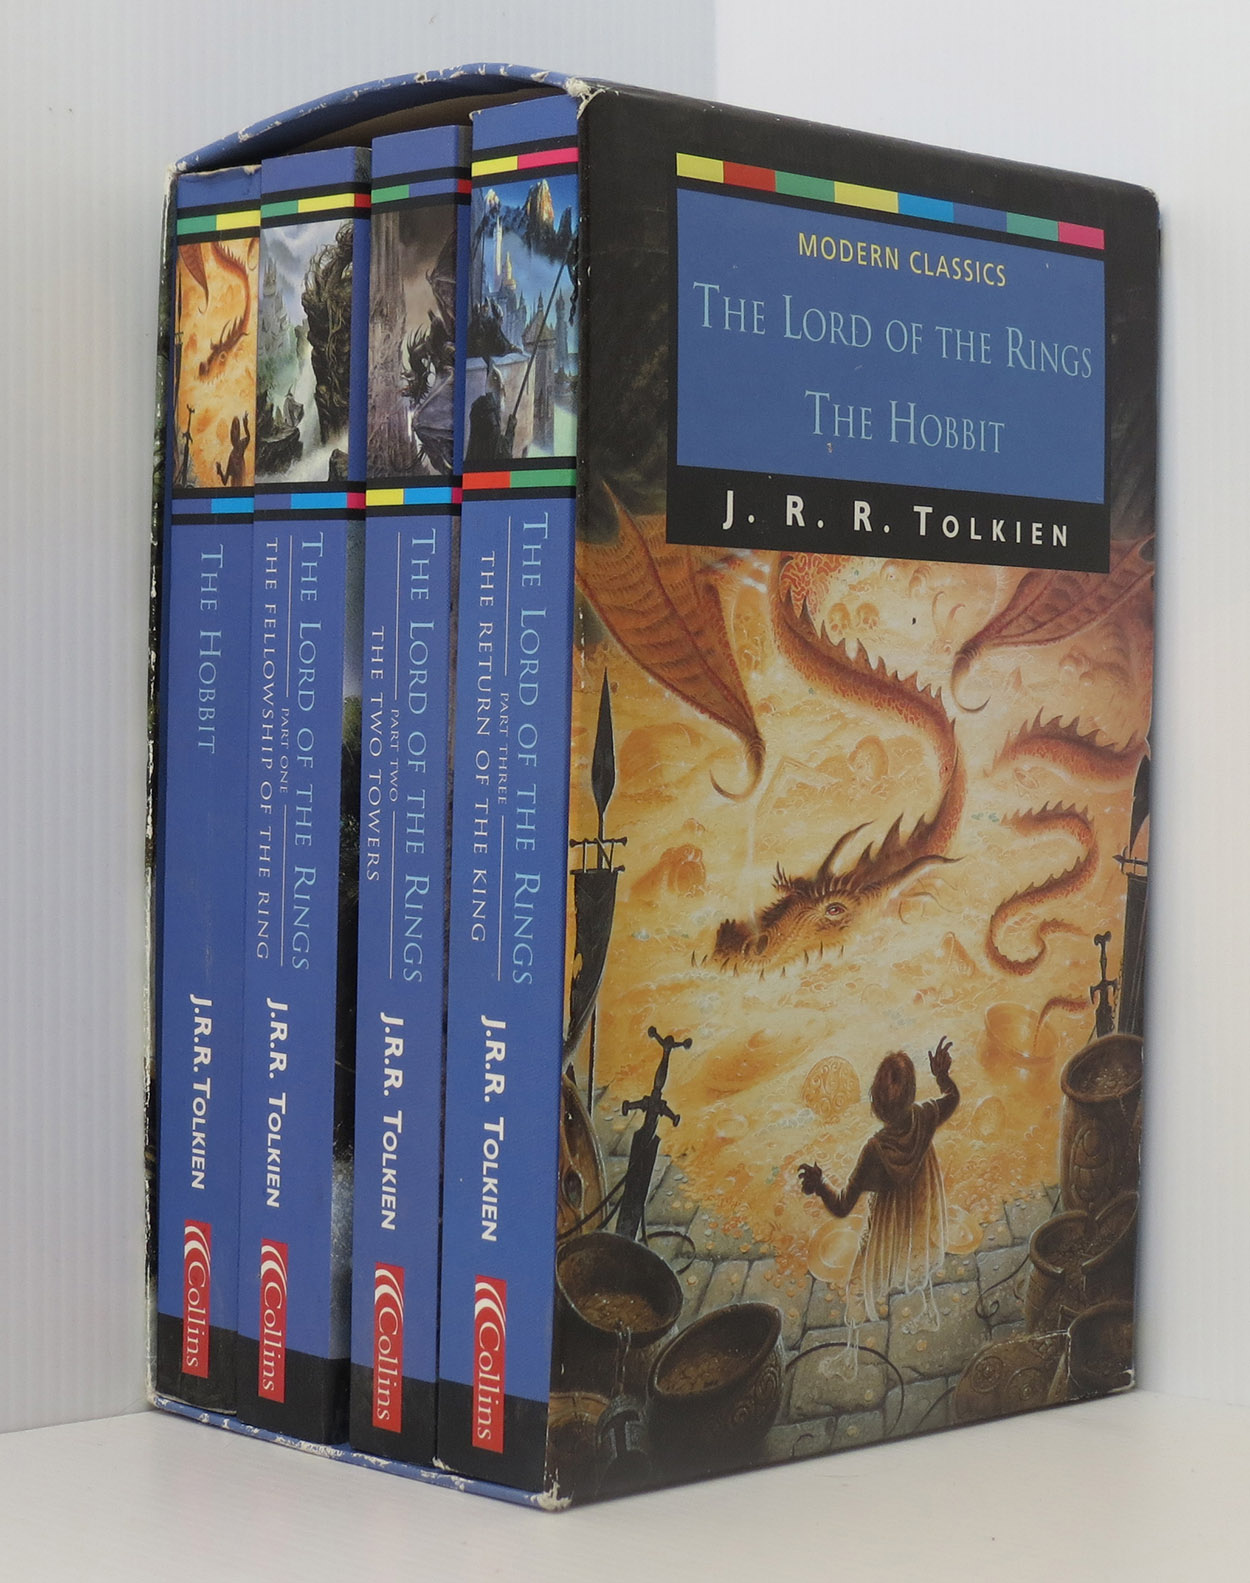 THE HOBBIT AND THE LORD OF THE RINGS ( BOX SET ) BEST COMBO OF 4 BOOK